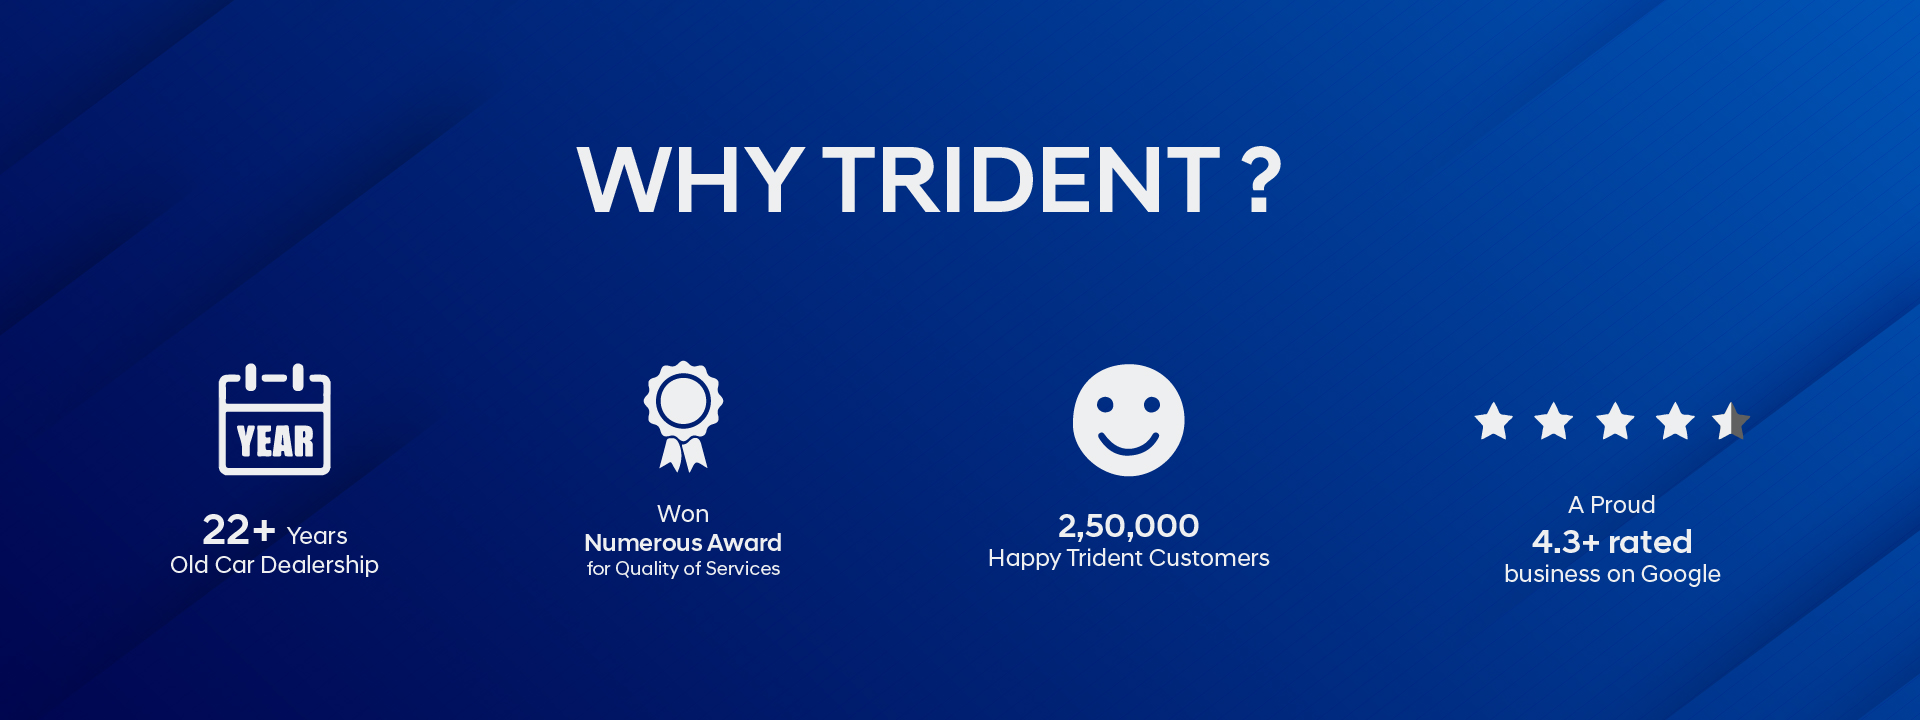 why trident